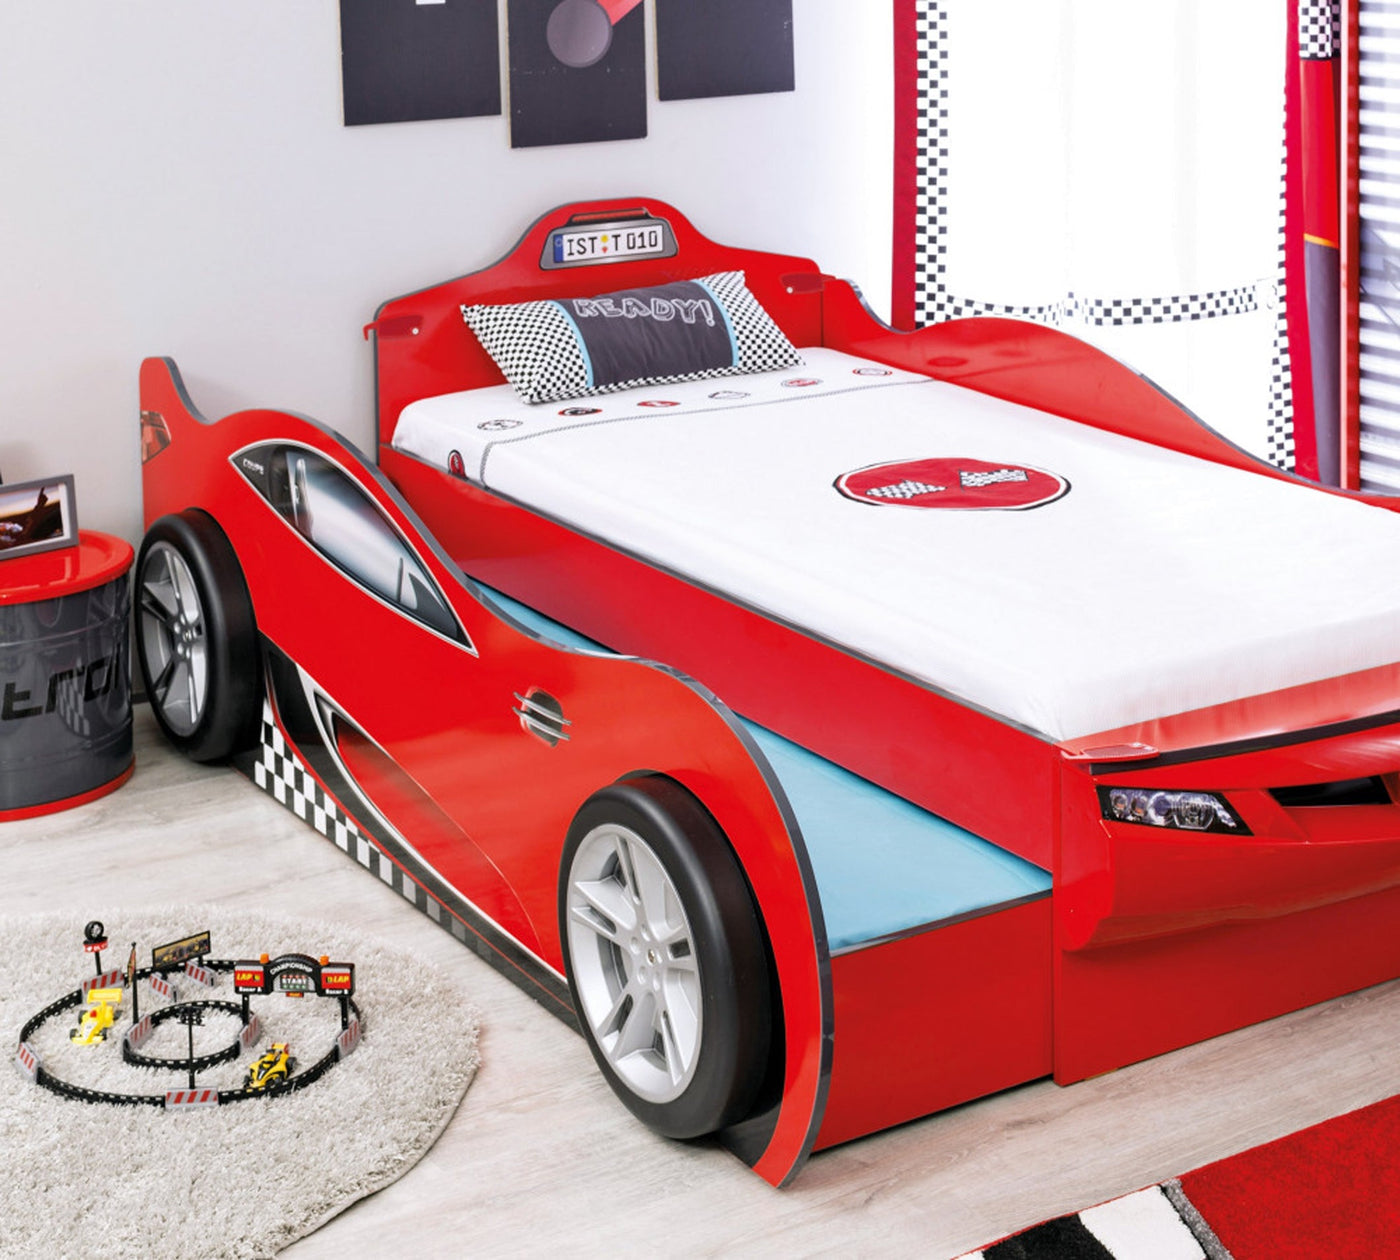 Race Cup Carbed [With Friend Bed] [Red] [90x190 - 90x180 Cm]